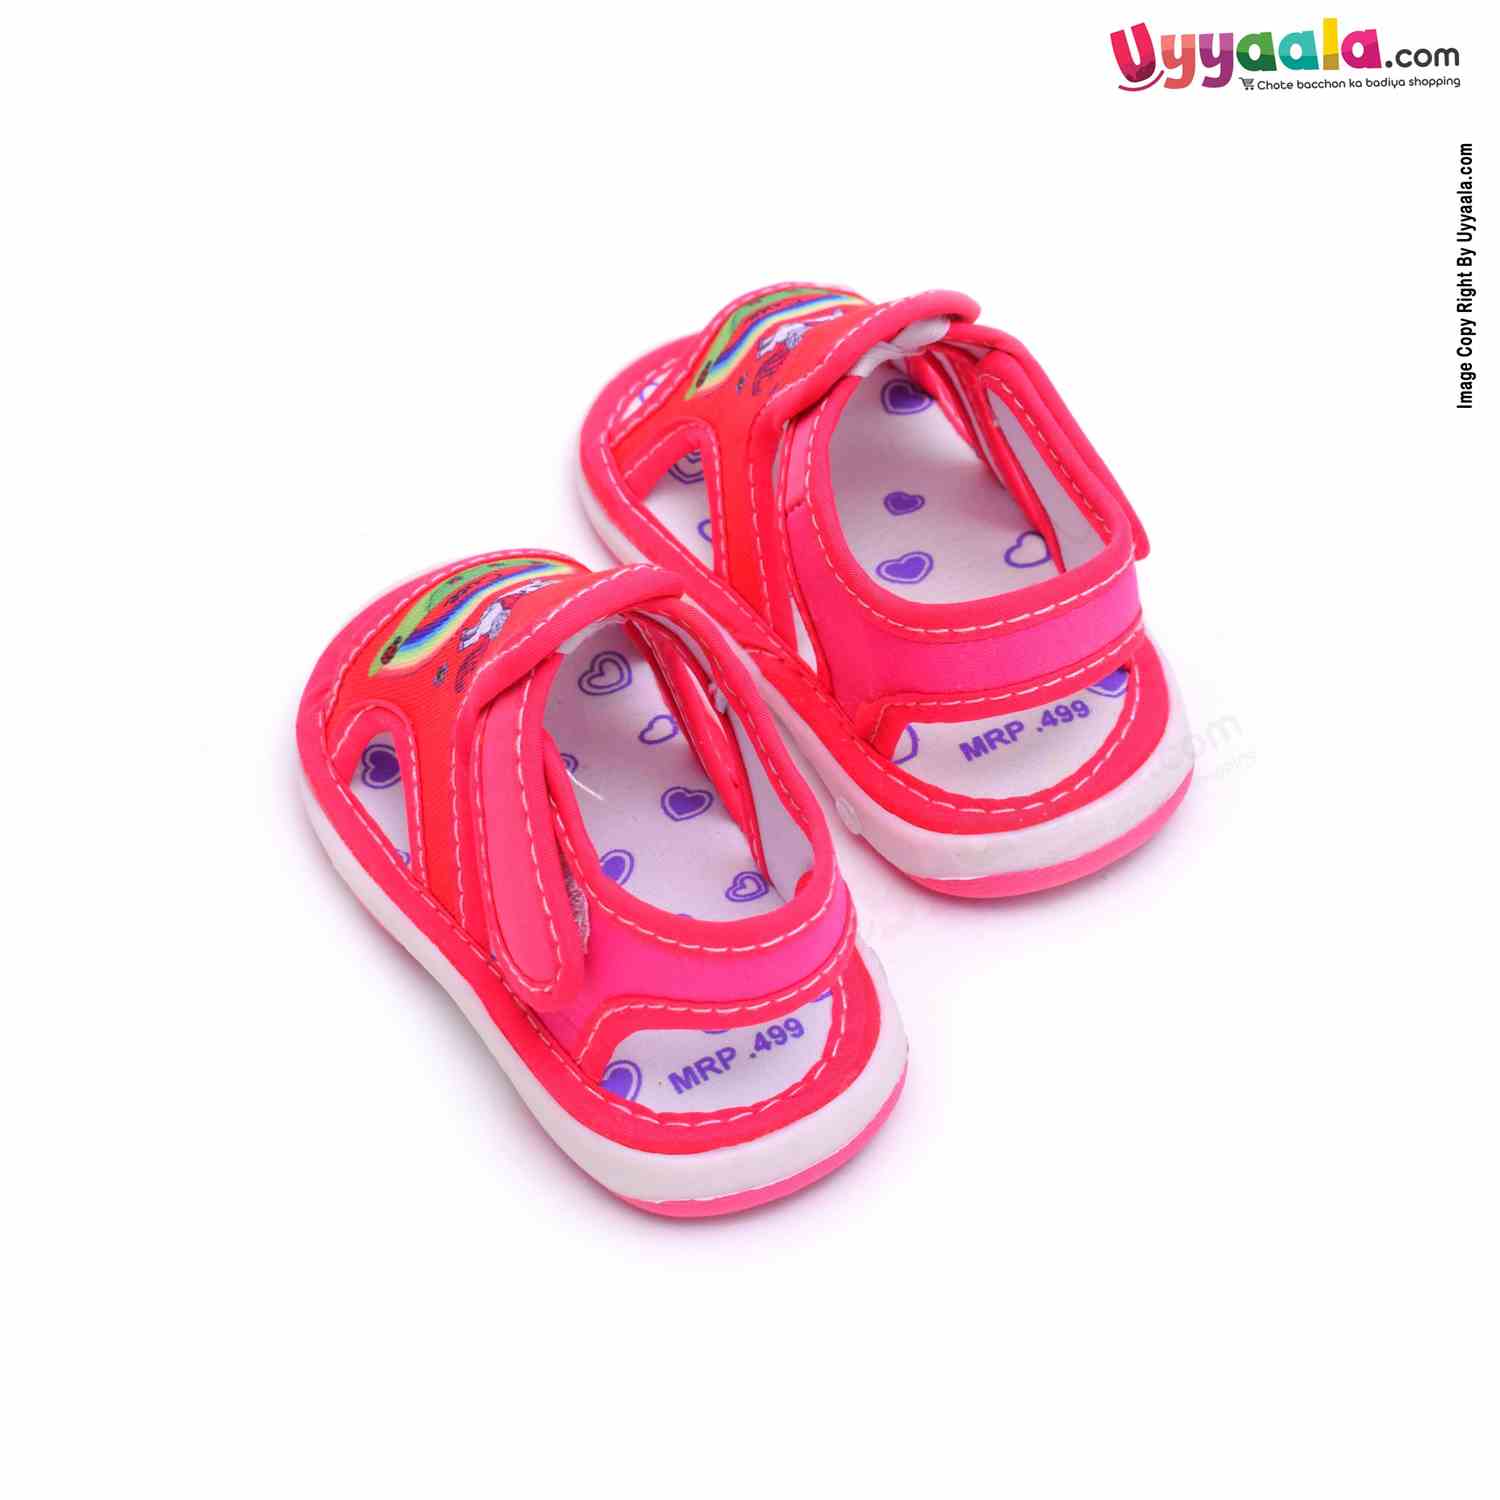 Kids Collection Lets Go Chu Chu Sandals with Cute Unicorn Print - Magenta